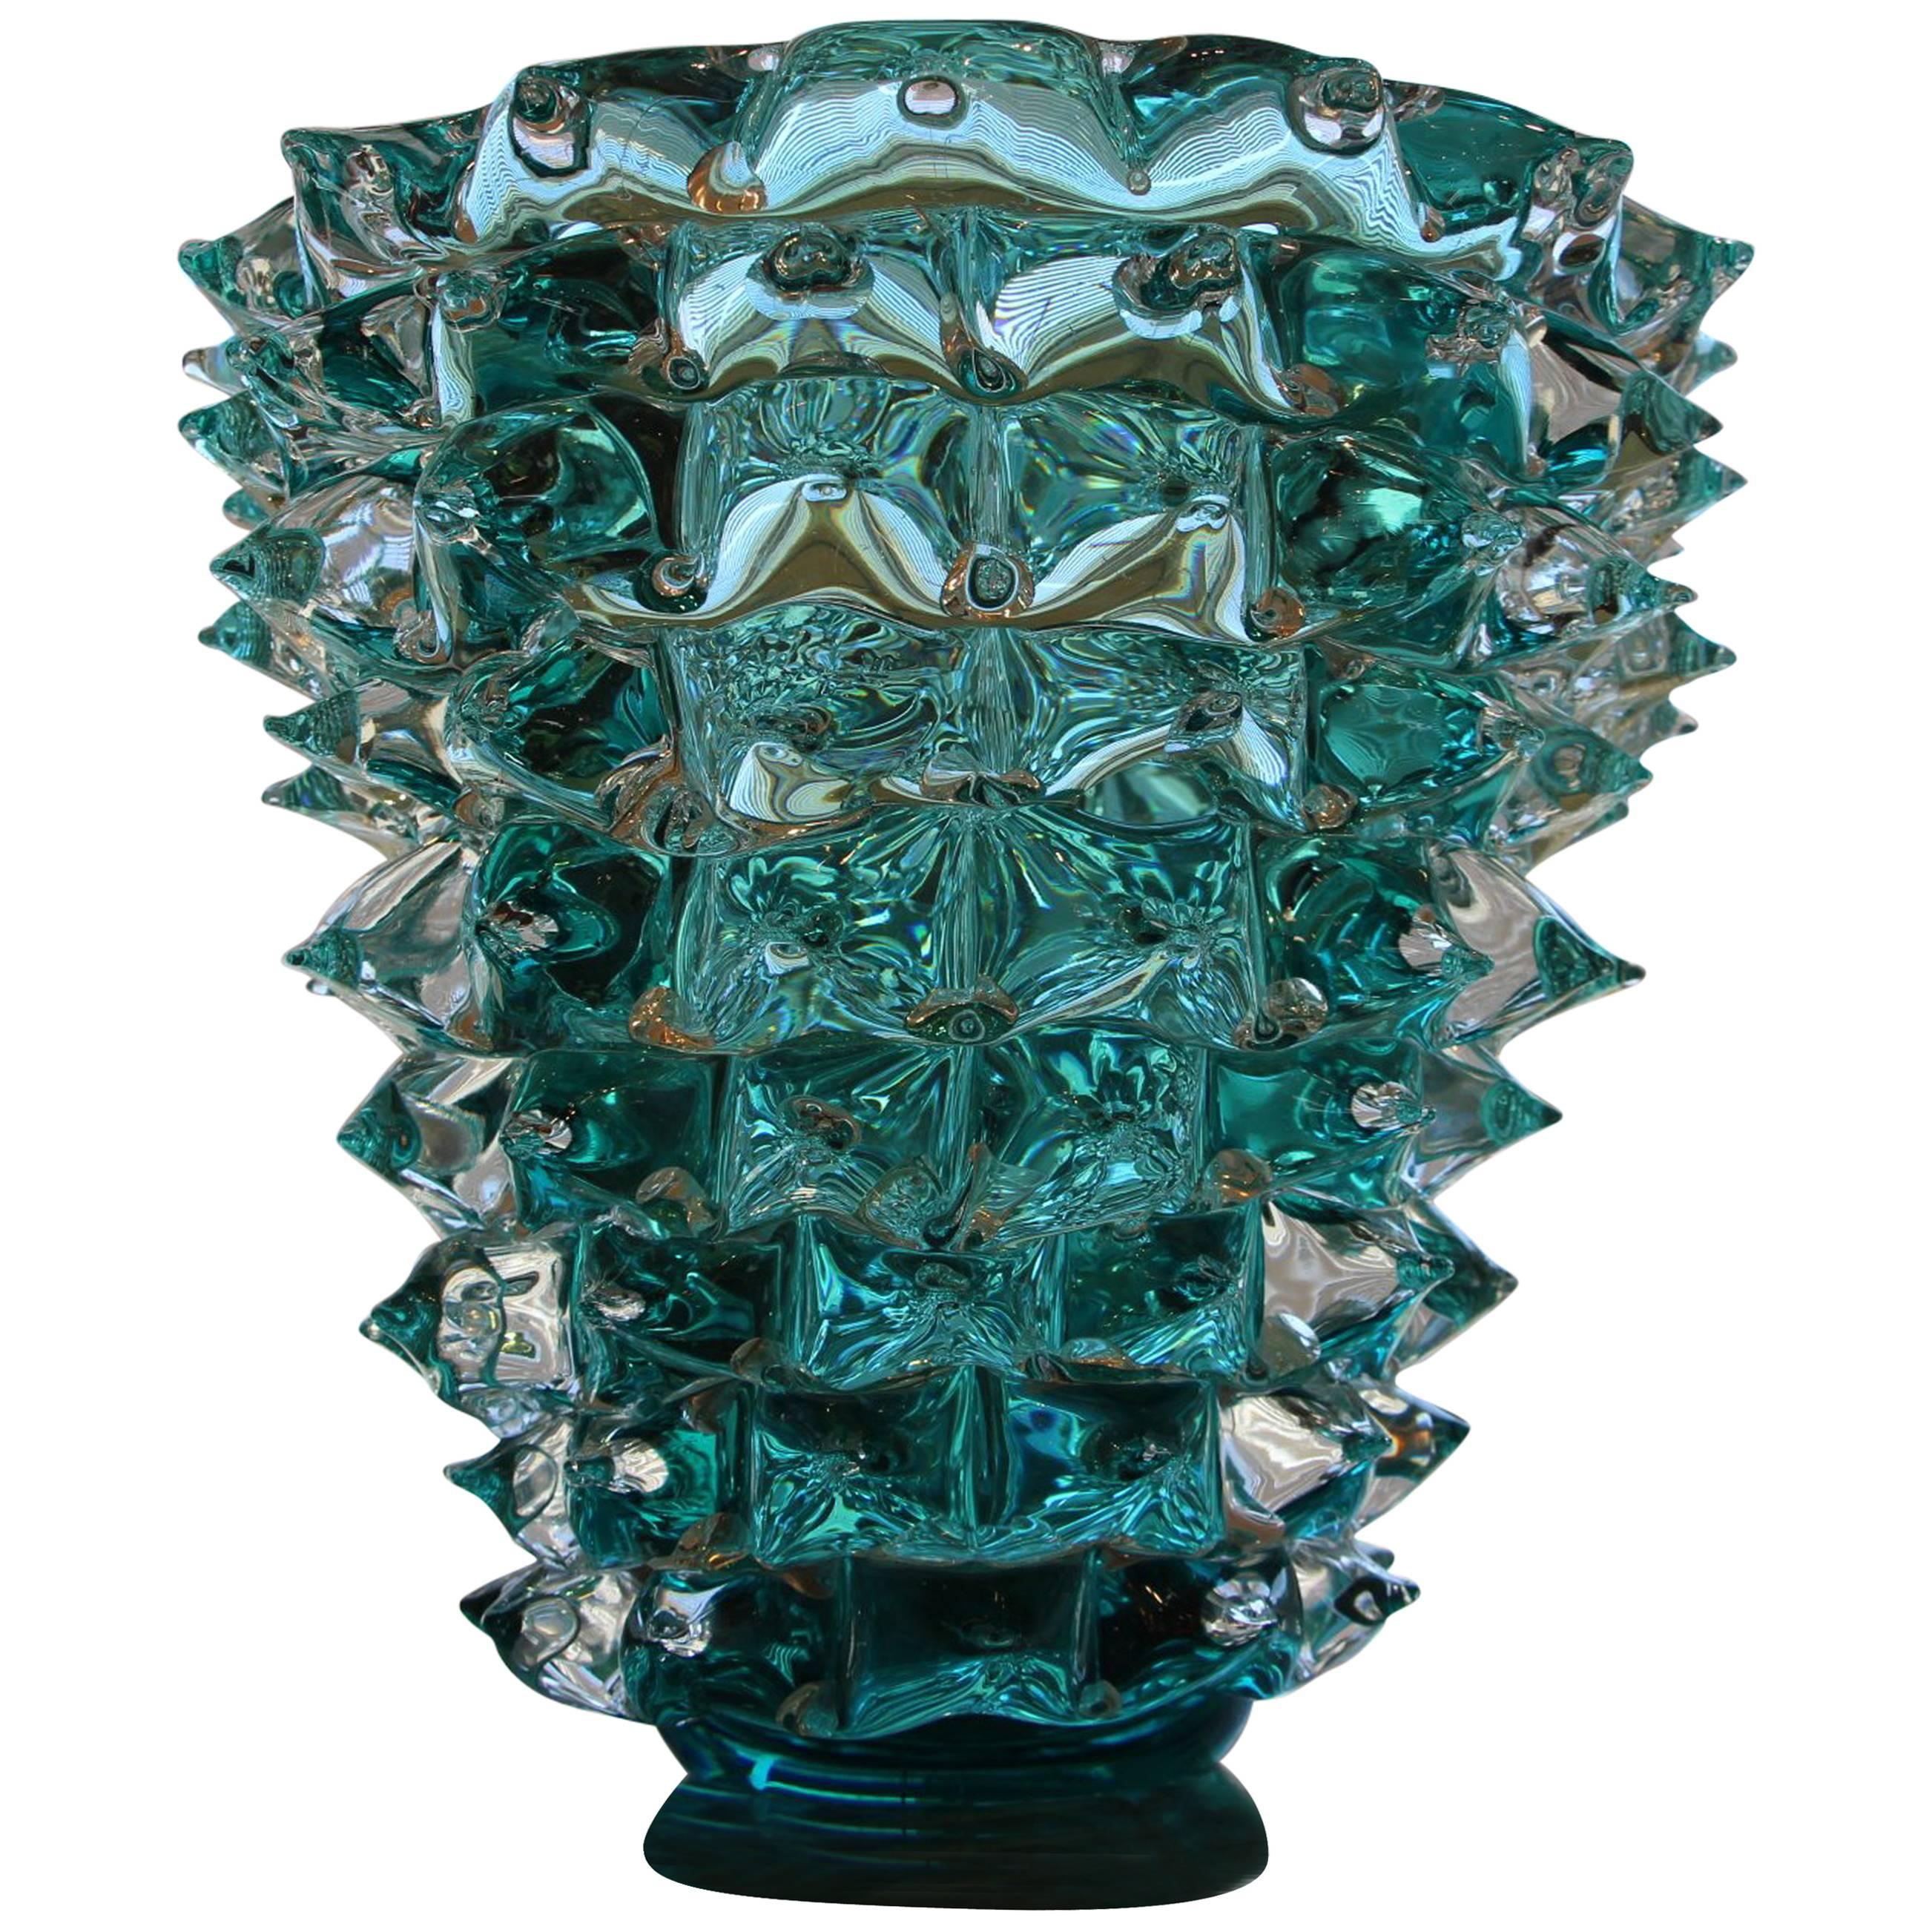 Turquoise Blue Vase in Murano Glass with Spikes Decor, Barovier Style, Rostrato